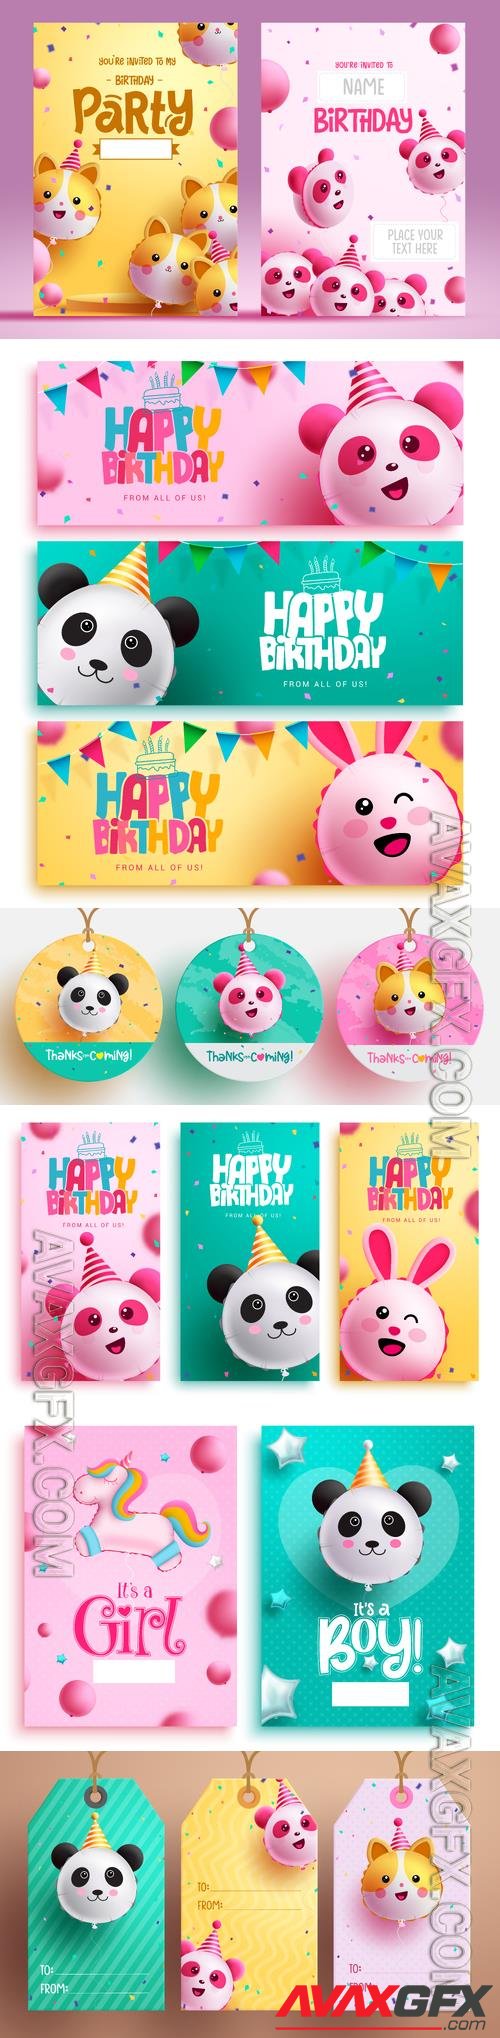 Happy birthday vector banner set,  birthday greeting card with inflatable character